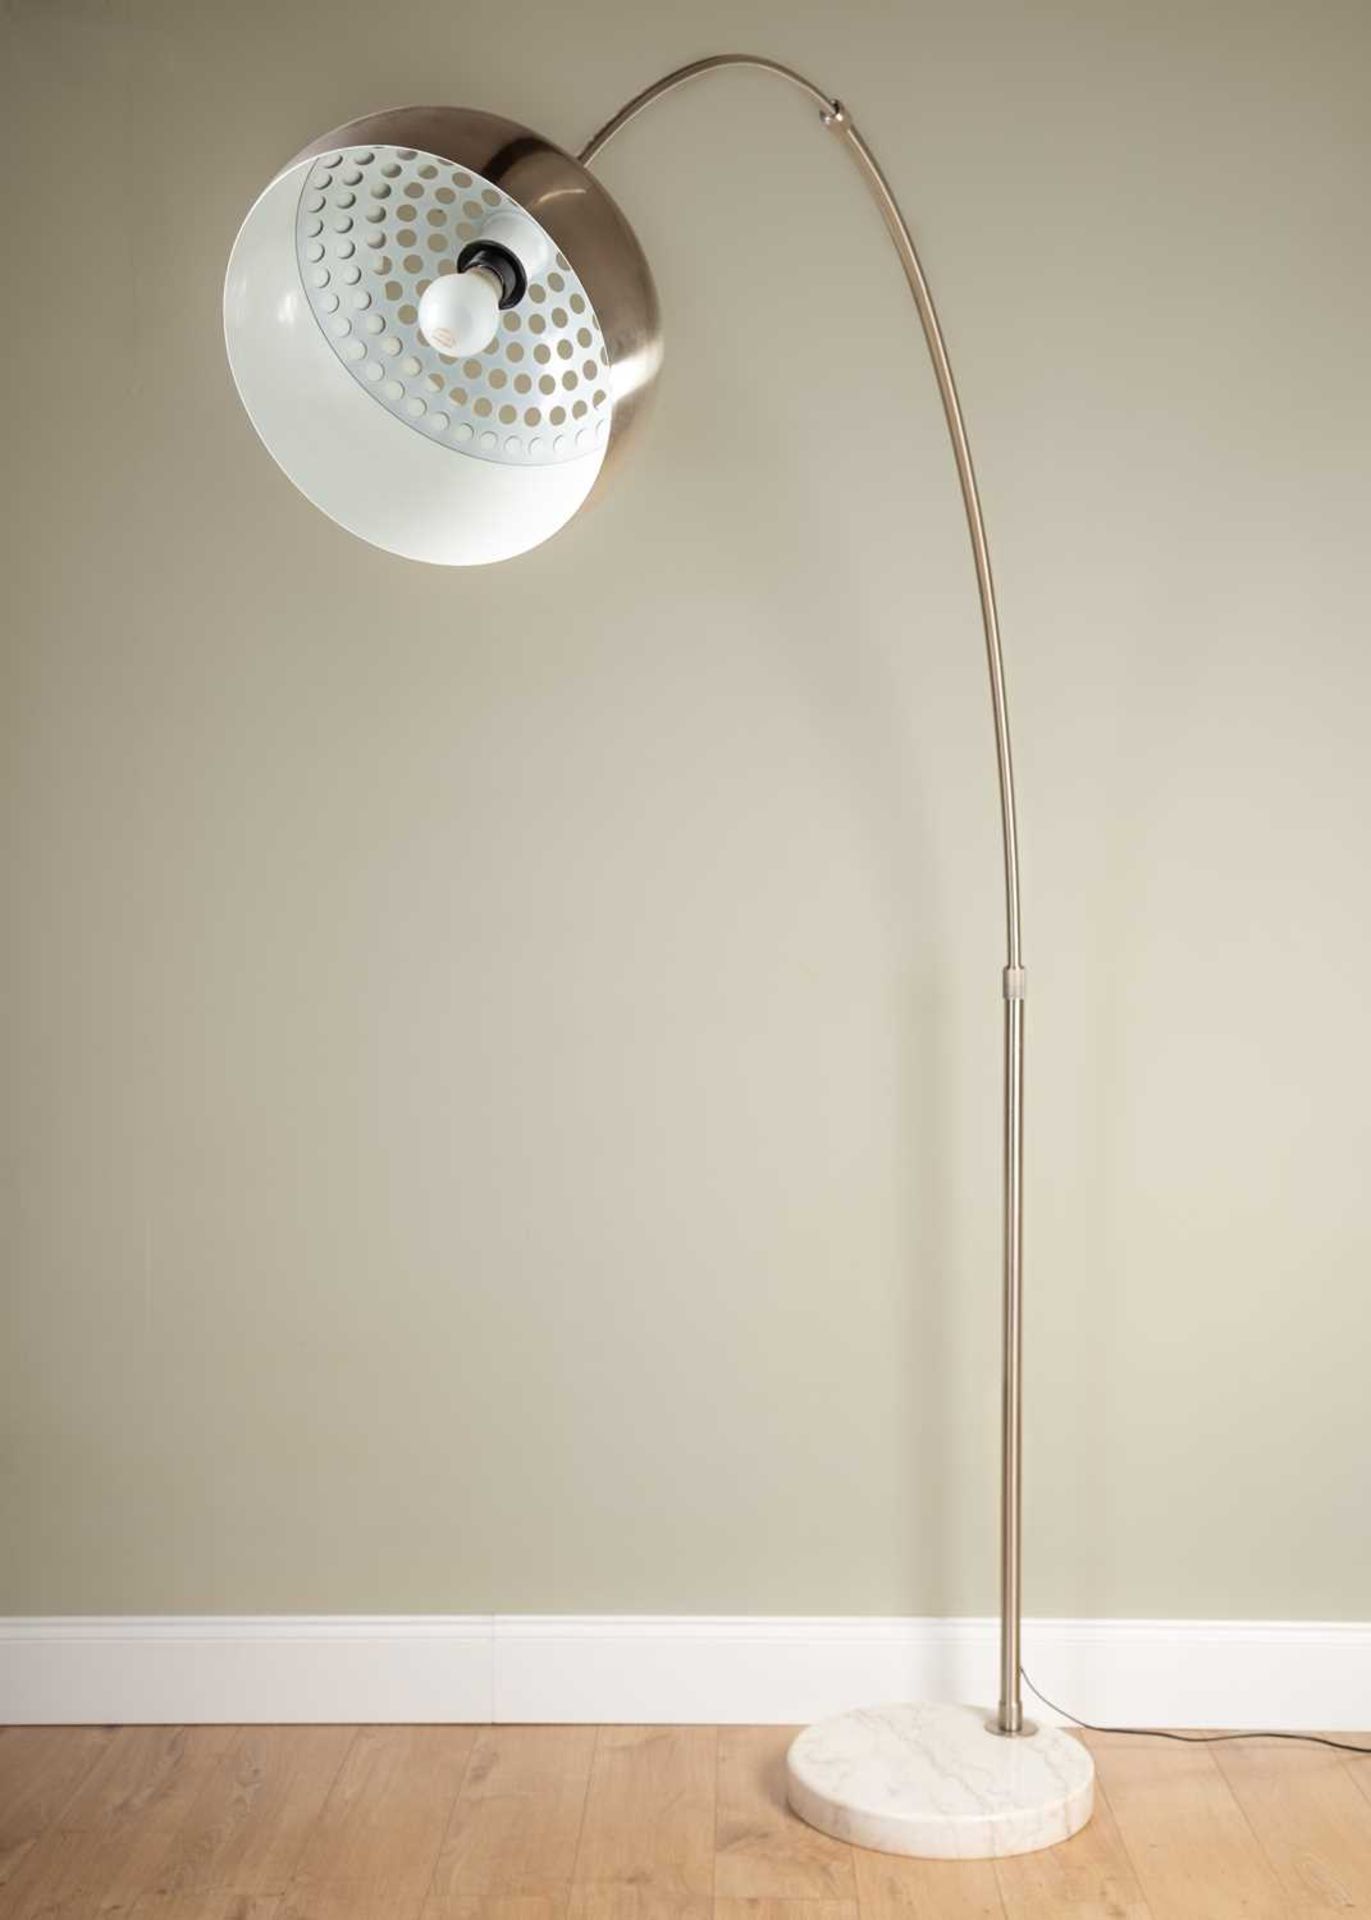 An Arco style floor lamp with arching chrome arm on circular white marble base, approximately